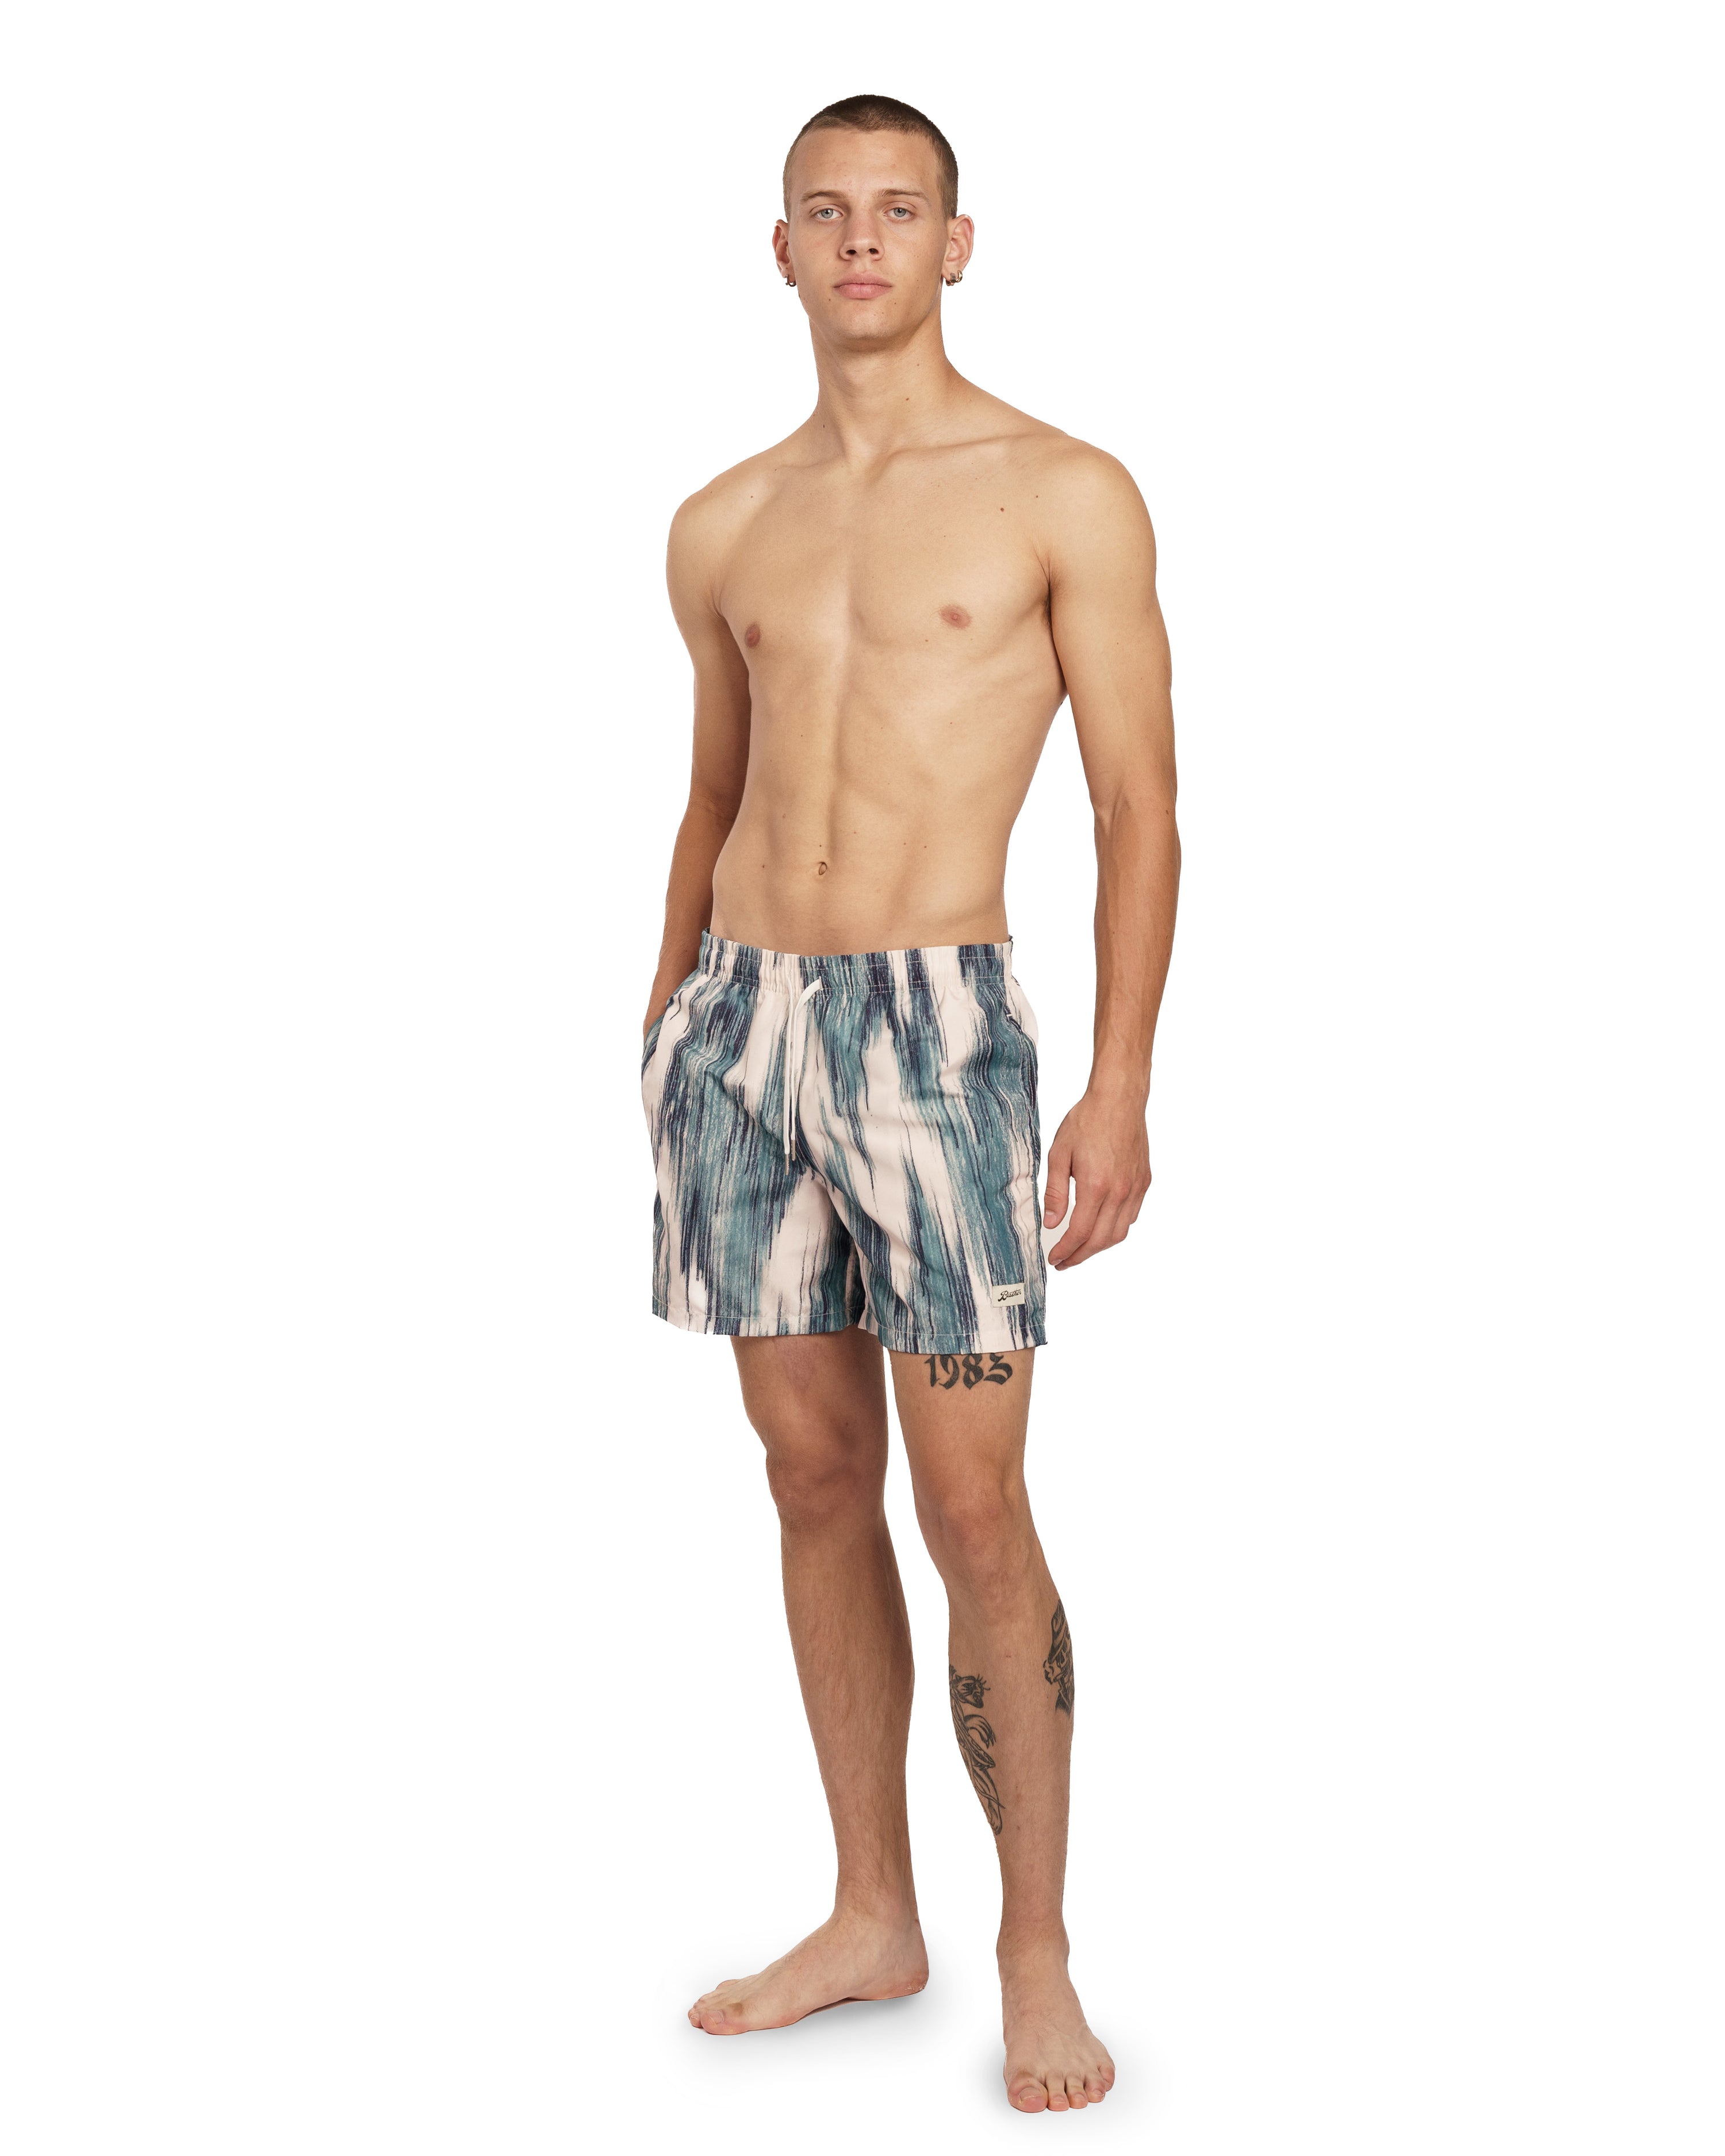 model wearing teal and cream Bather swim trunk with color contrasting pattern